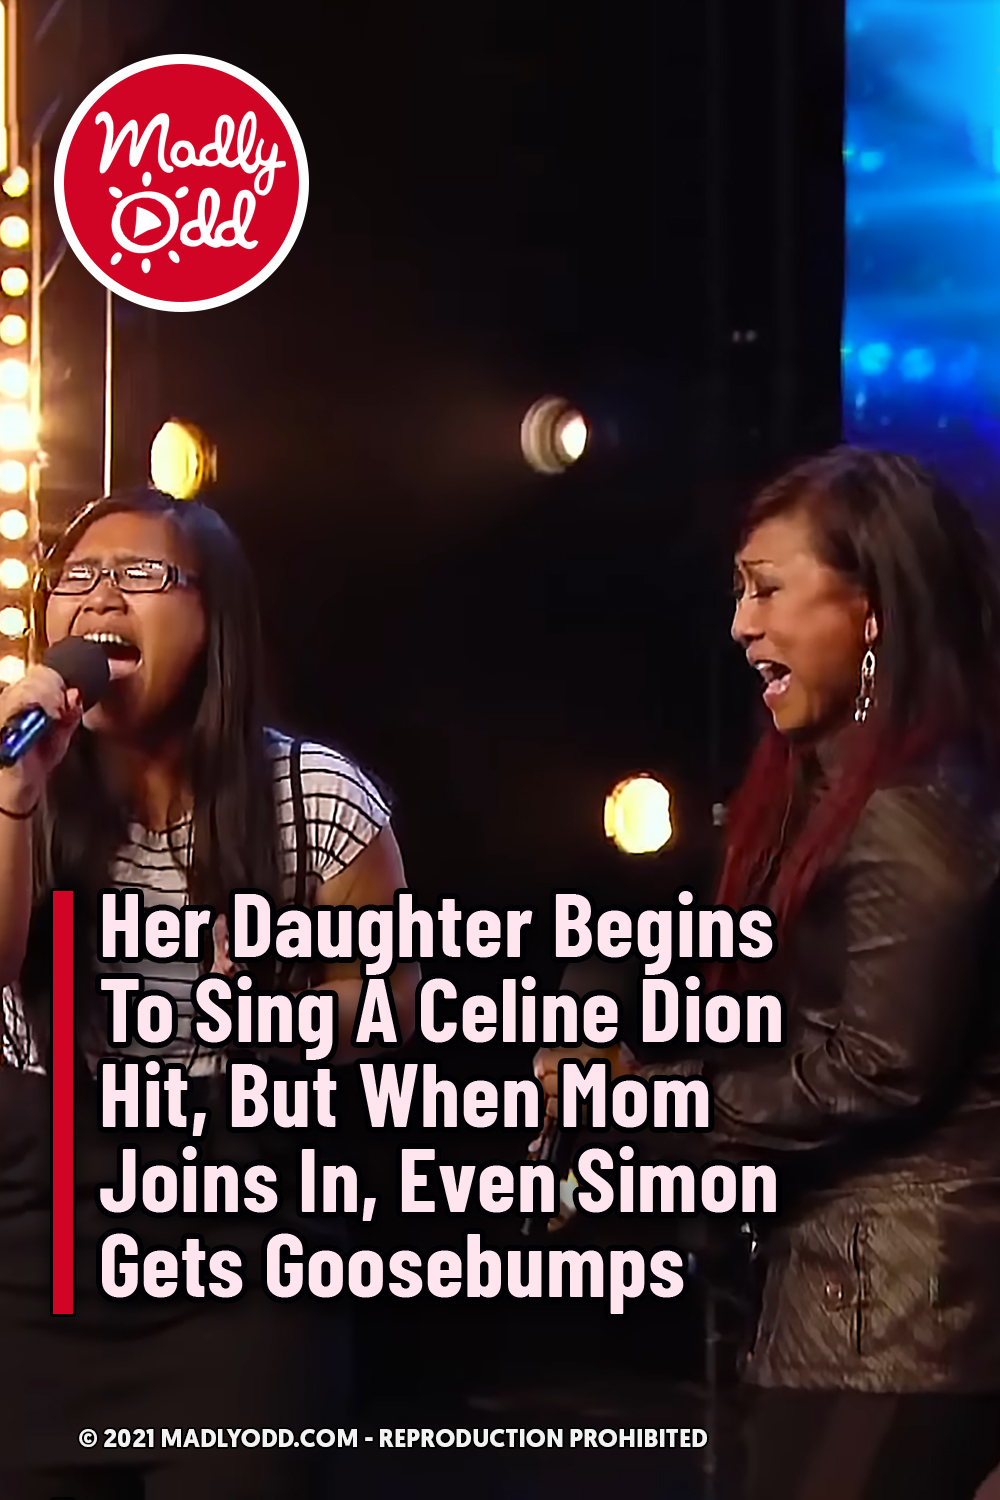 Her Daughter Begins To Sing A Celine Dion Hit, But When Mom Joins In, Even Simon Gets Goosebumps